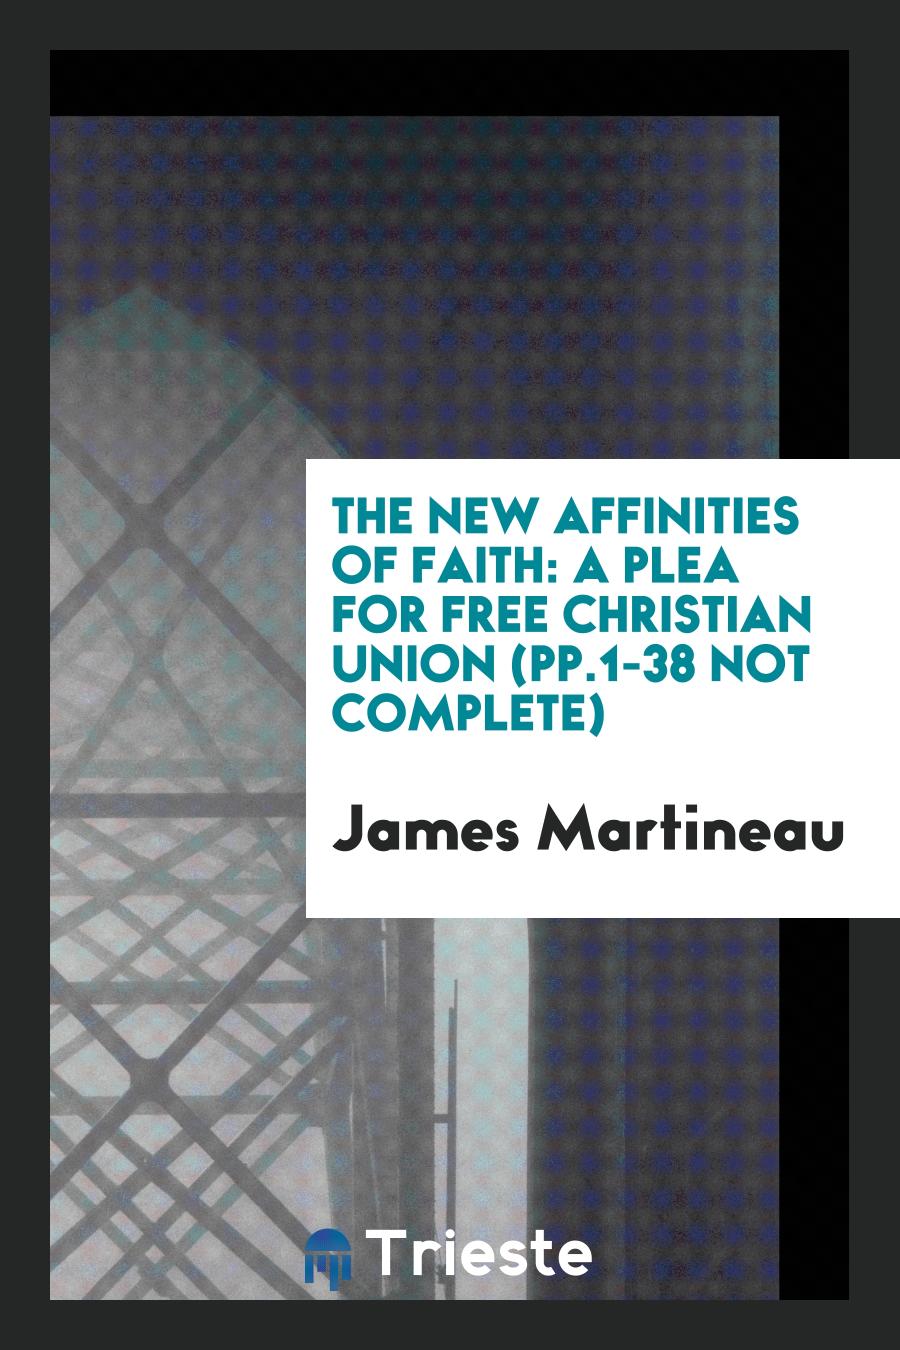 The New Affinities of Faith: A Plea for Free Christian Union (pp.1-38 not complete)